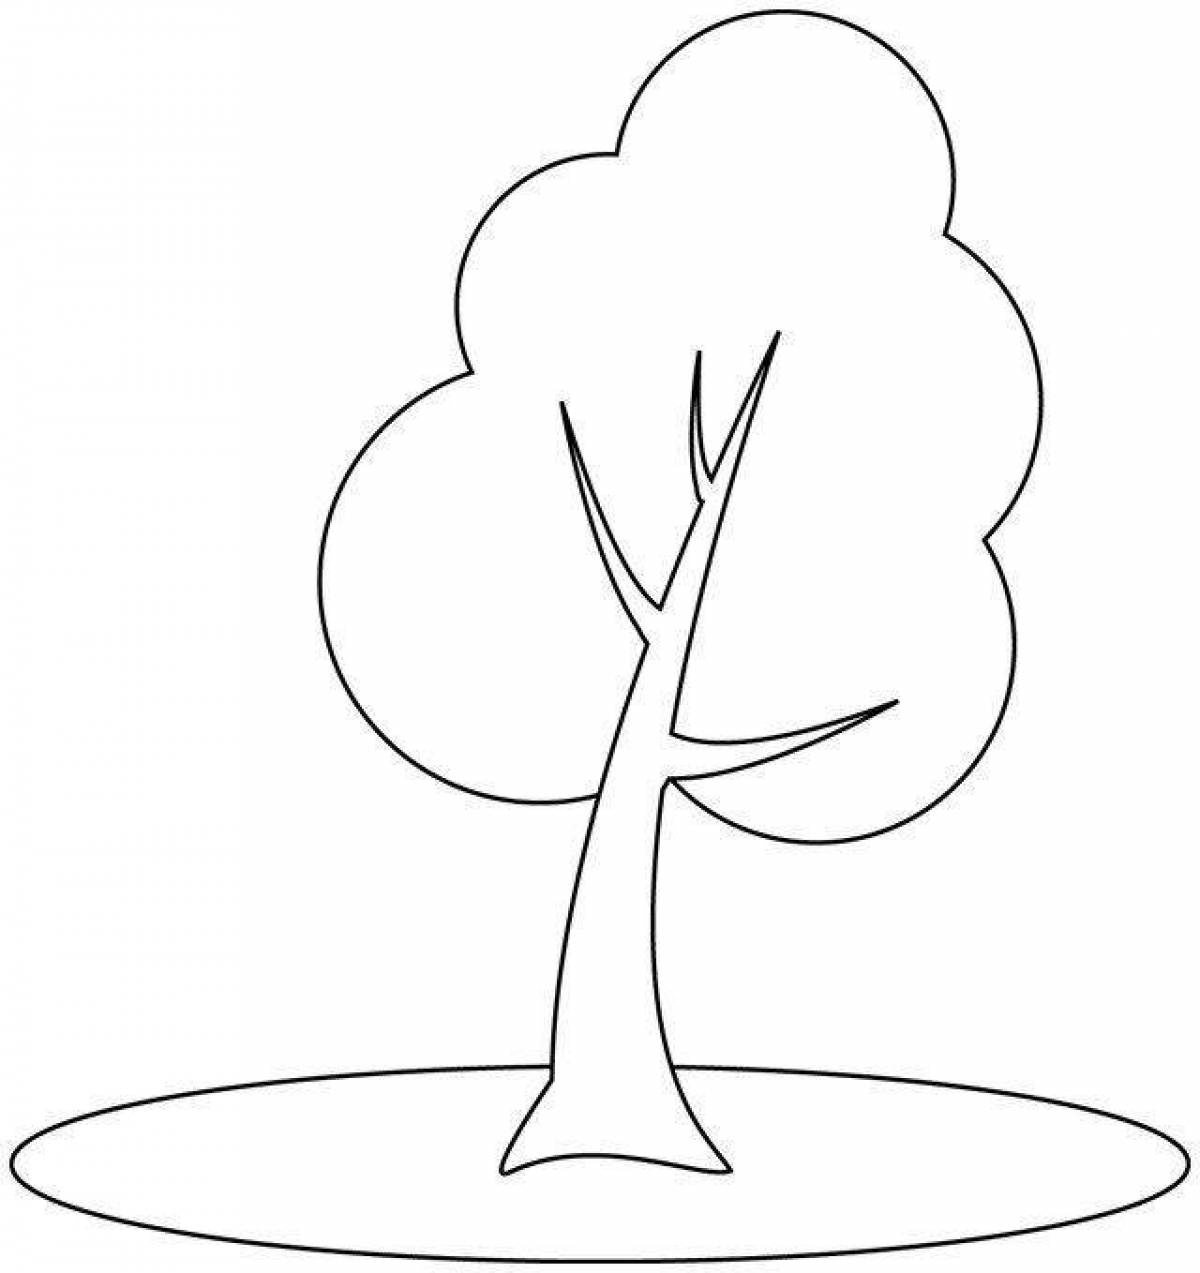 Adorable pattern tree coloring page